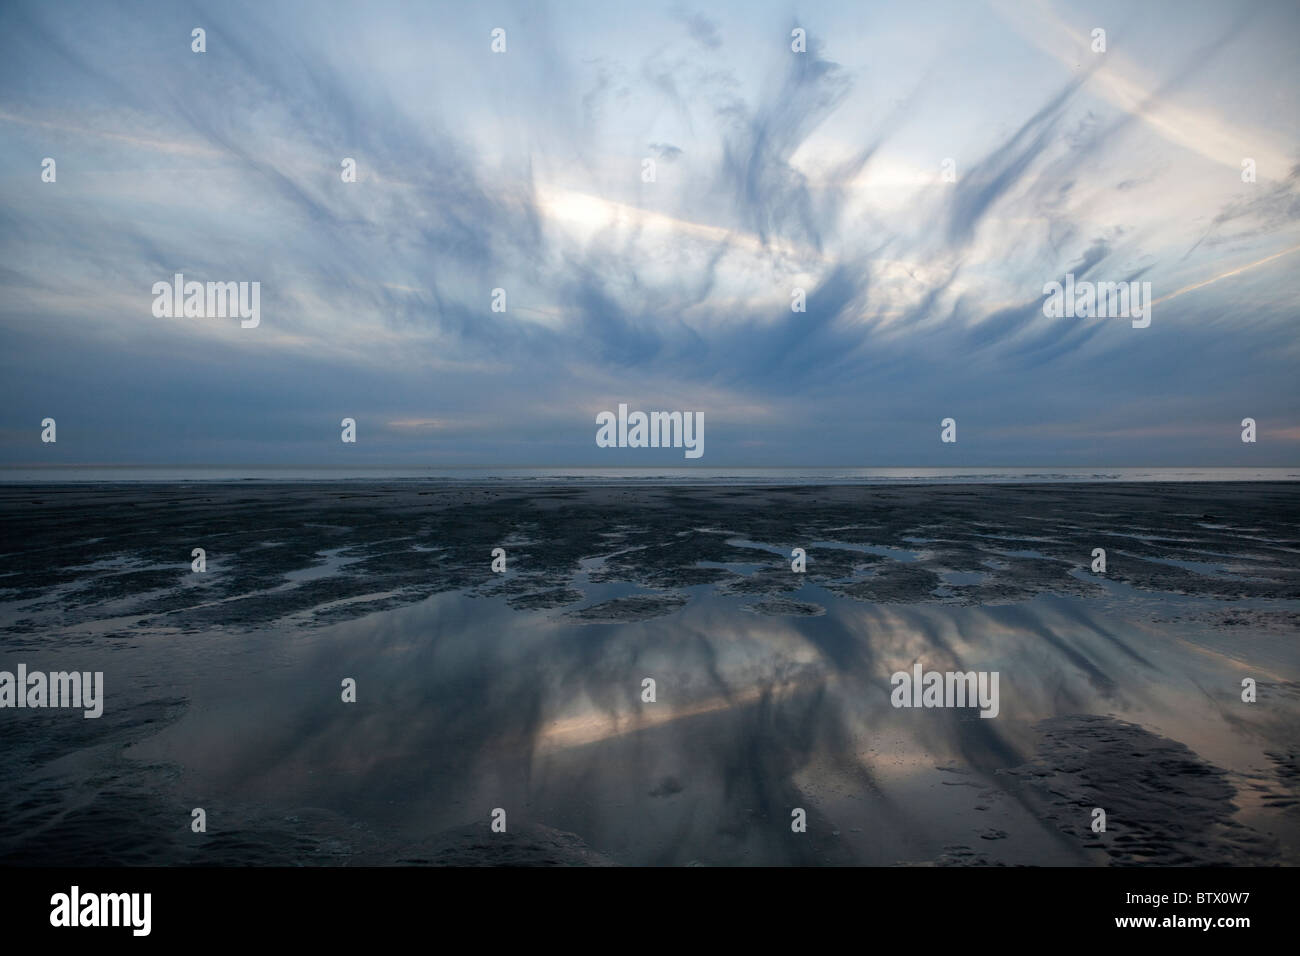 Dramatic sky reflecting in water at sunset on beach, at Le Touquet, France Stock Photo